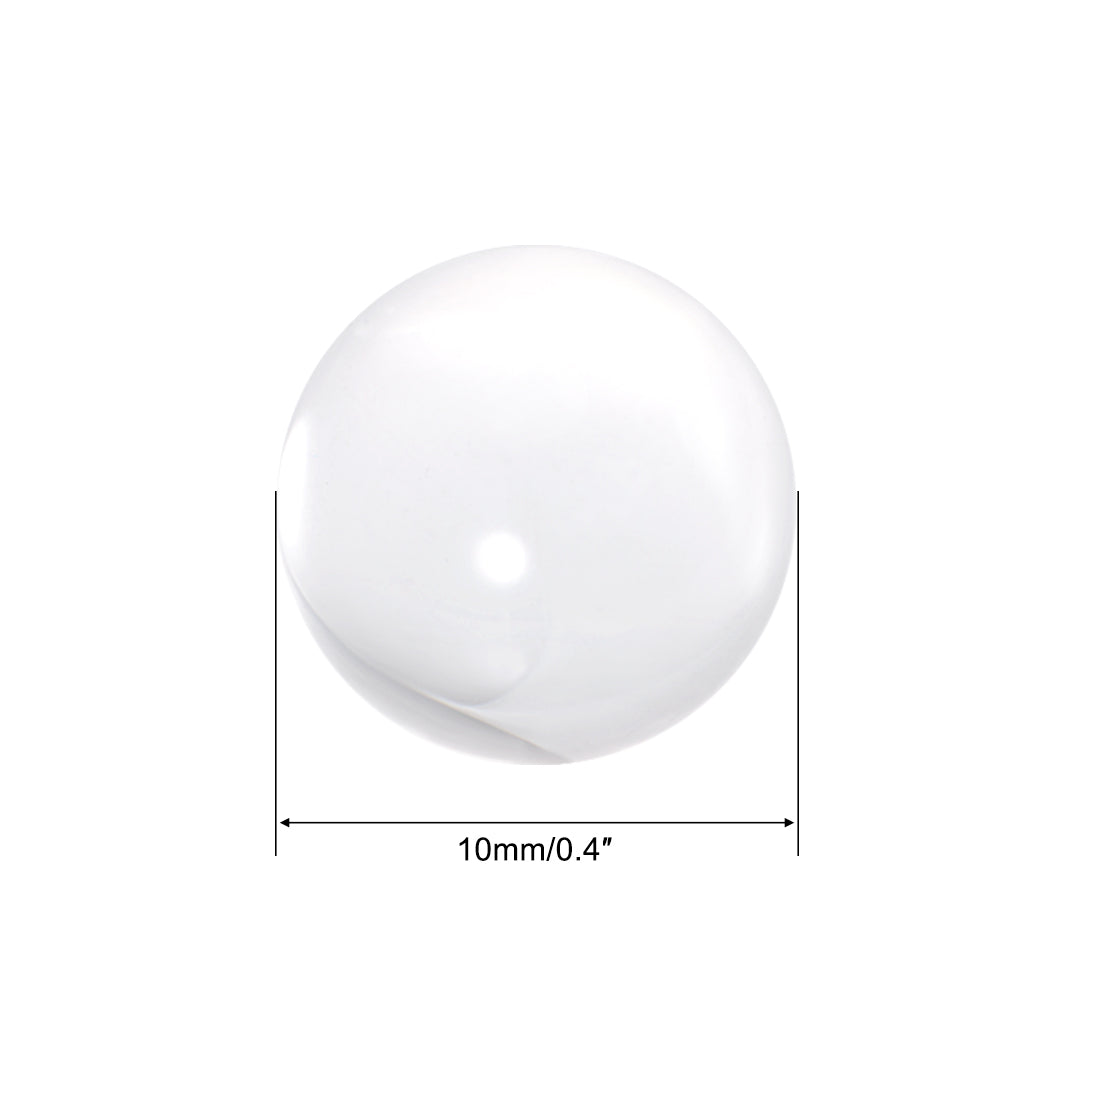 Uxcell Uxcell 30mm Diameter Acrylic Ball Yellow Sphere Ornament 1.2 Inches 2 Pcs